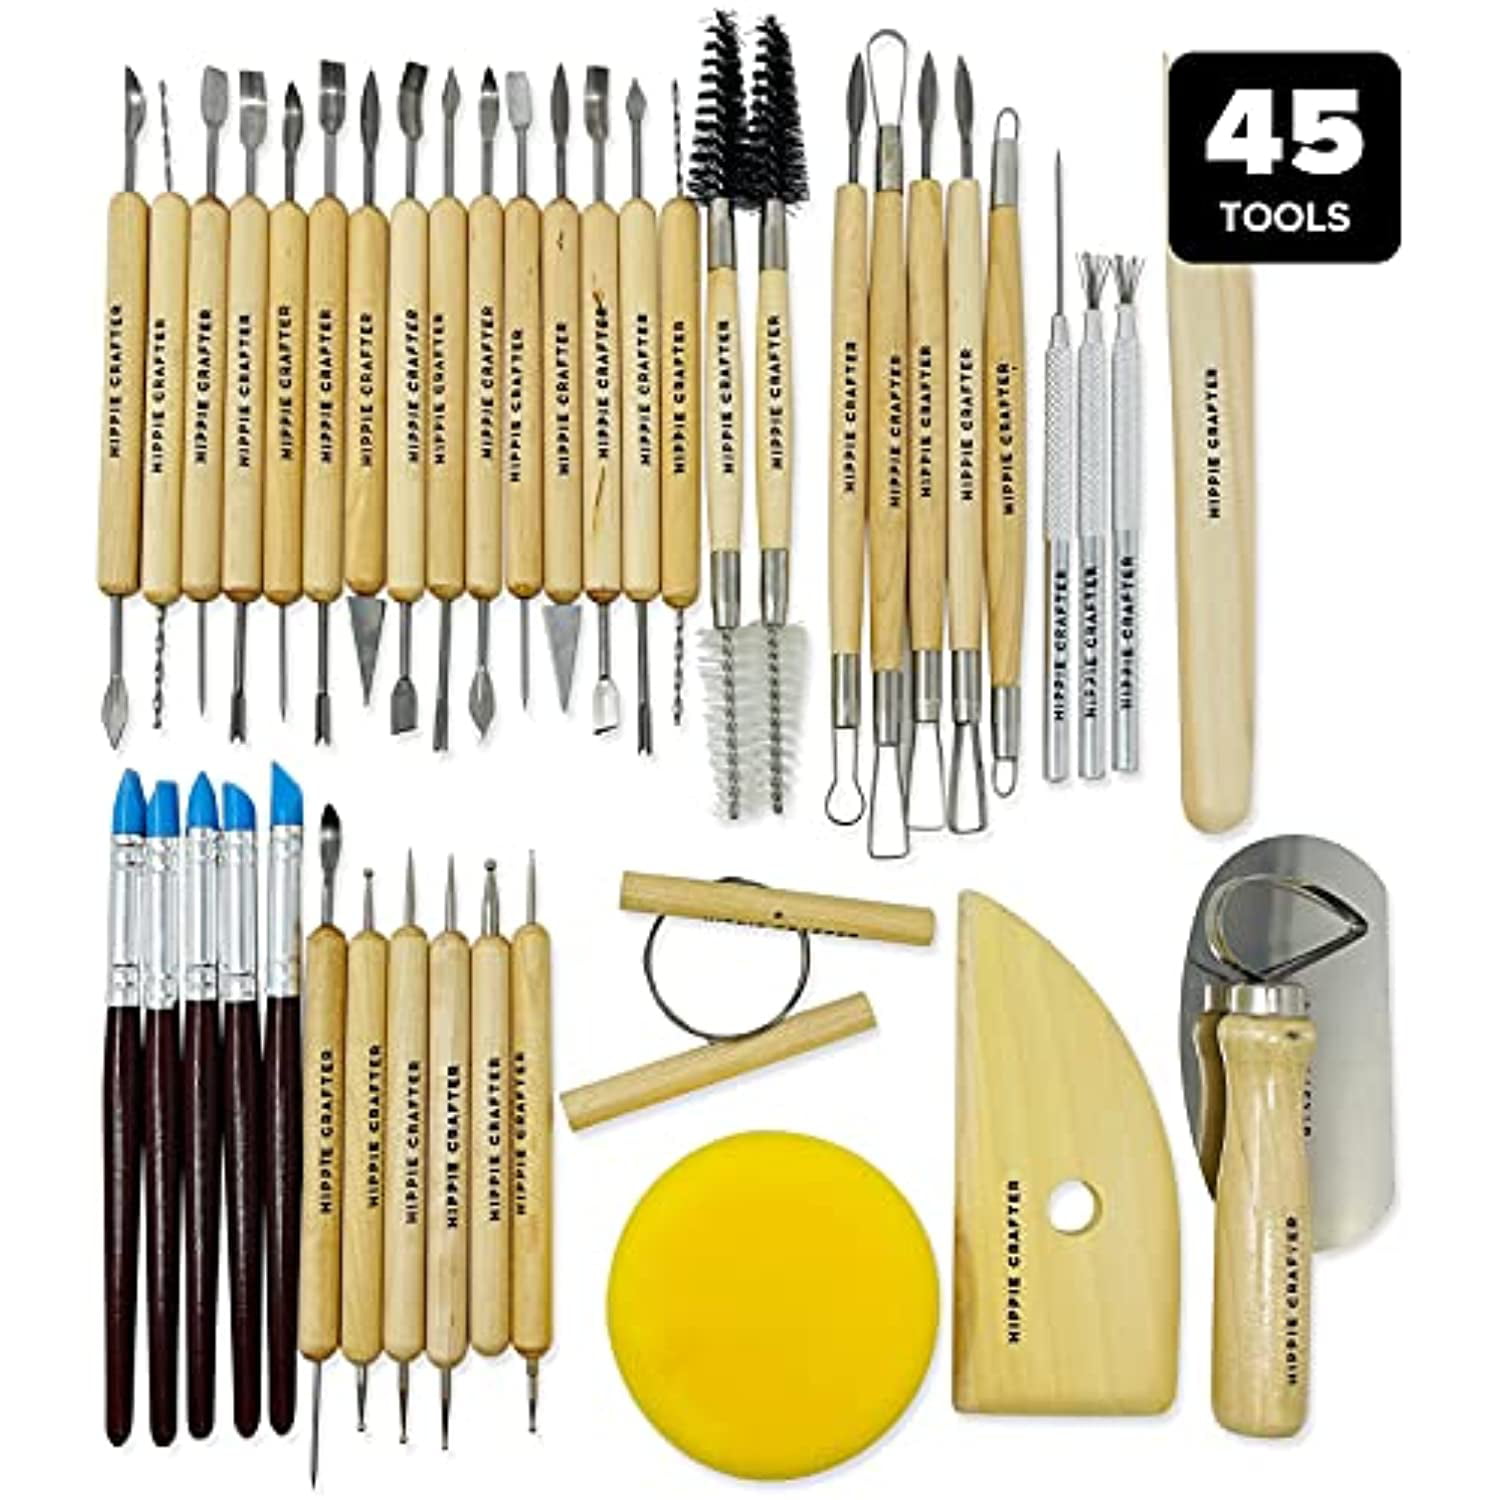  Clay Tools 46PCS Pottery Tools Clay Sculpting Tools for Kids  Polymer Clay Tools Kit Ceramic Tools for DIY Handcraft Modeling Clay  Carving Tools Set